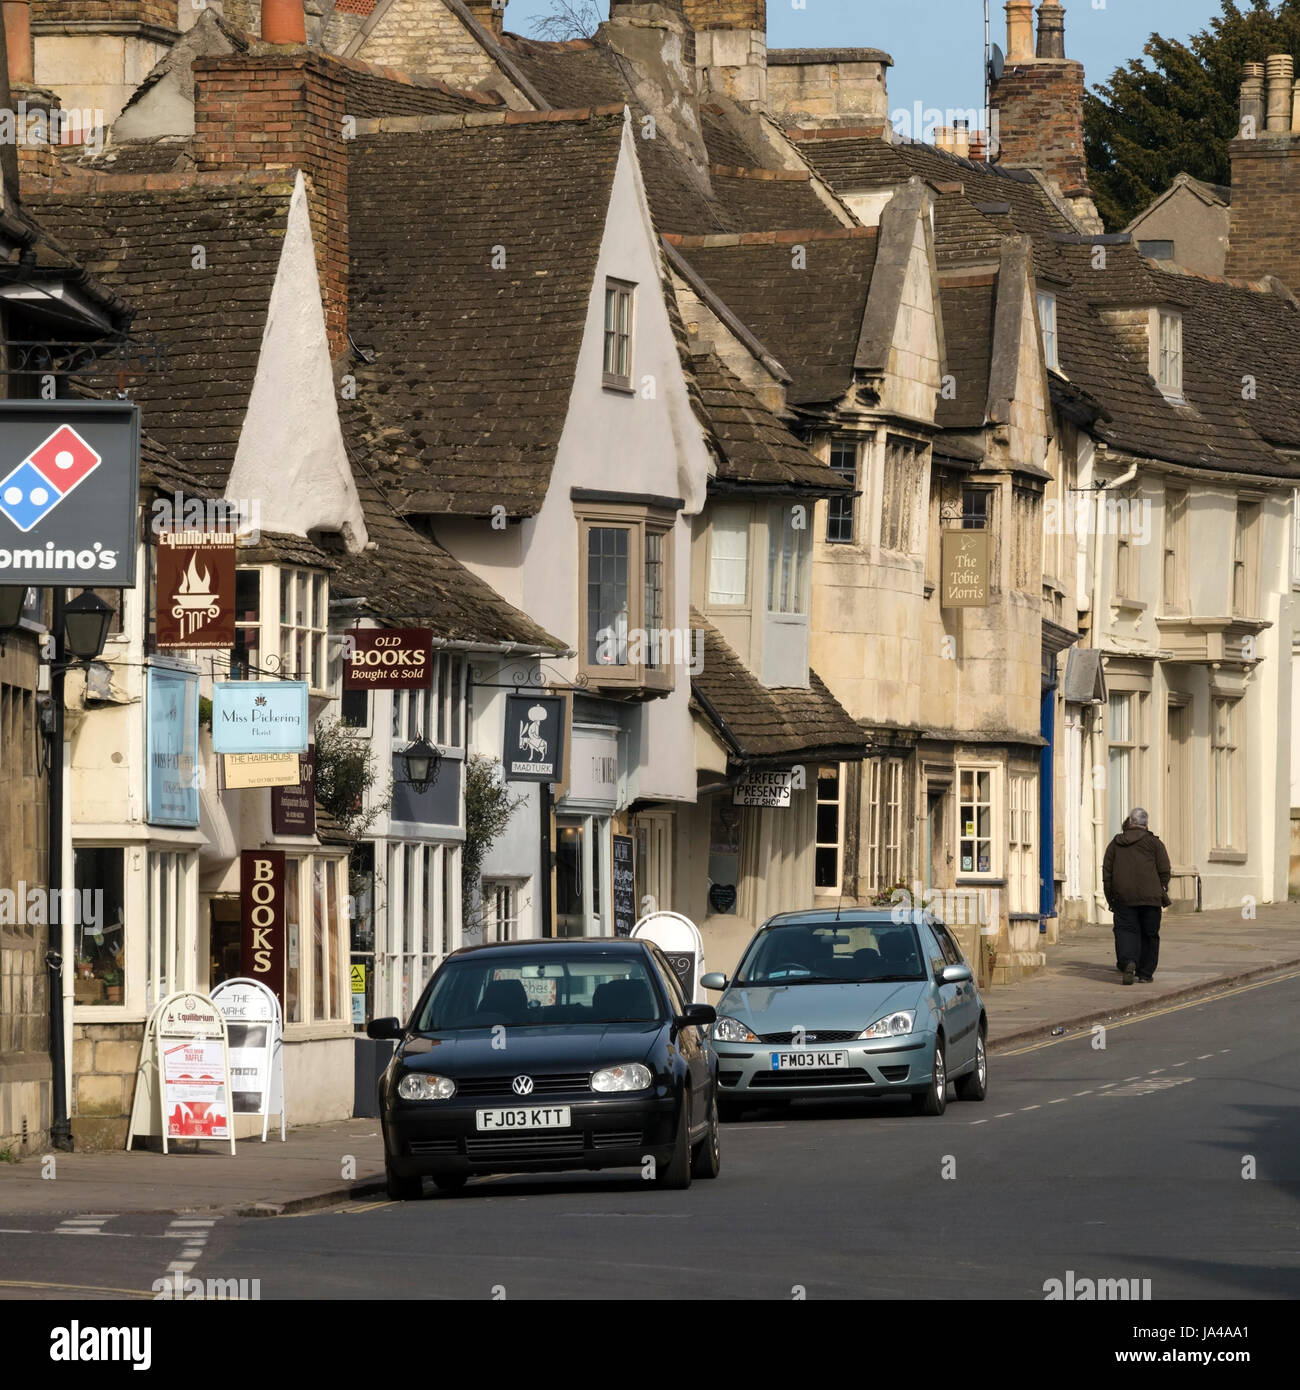 Old traditional shop and house fronts, St Paul's Street, Stamford, Lincolnshire, England, UK Stock Photo